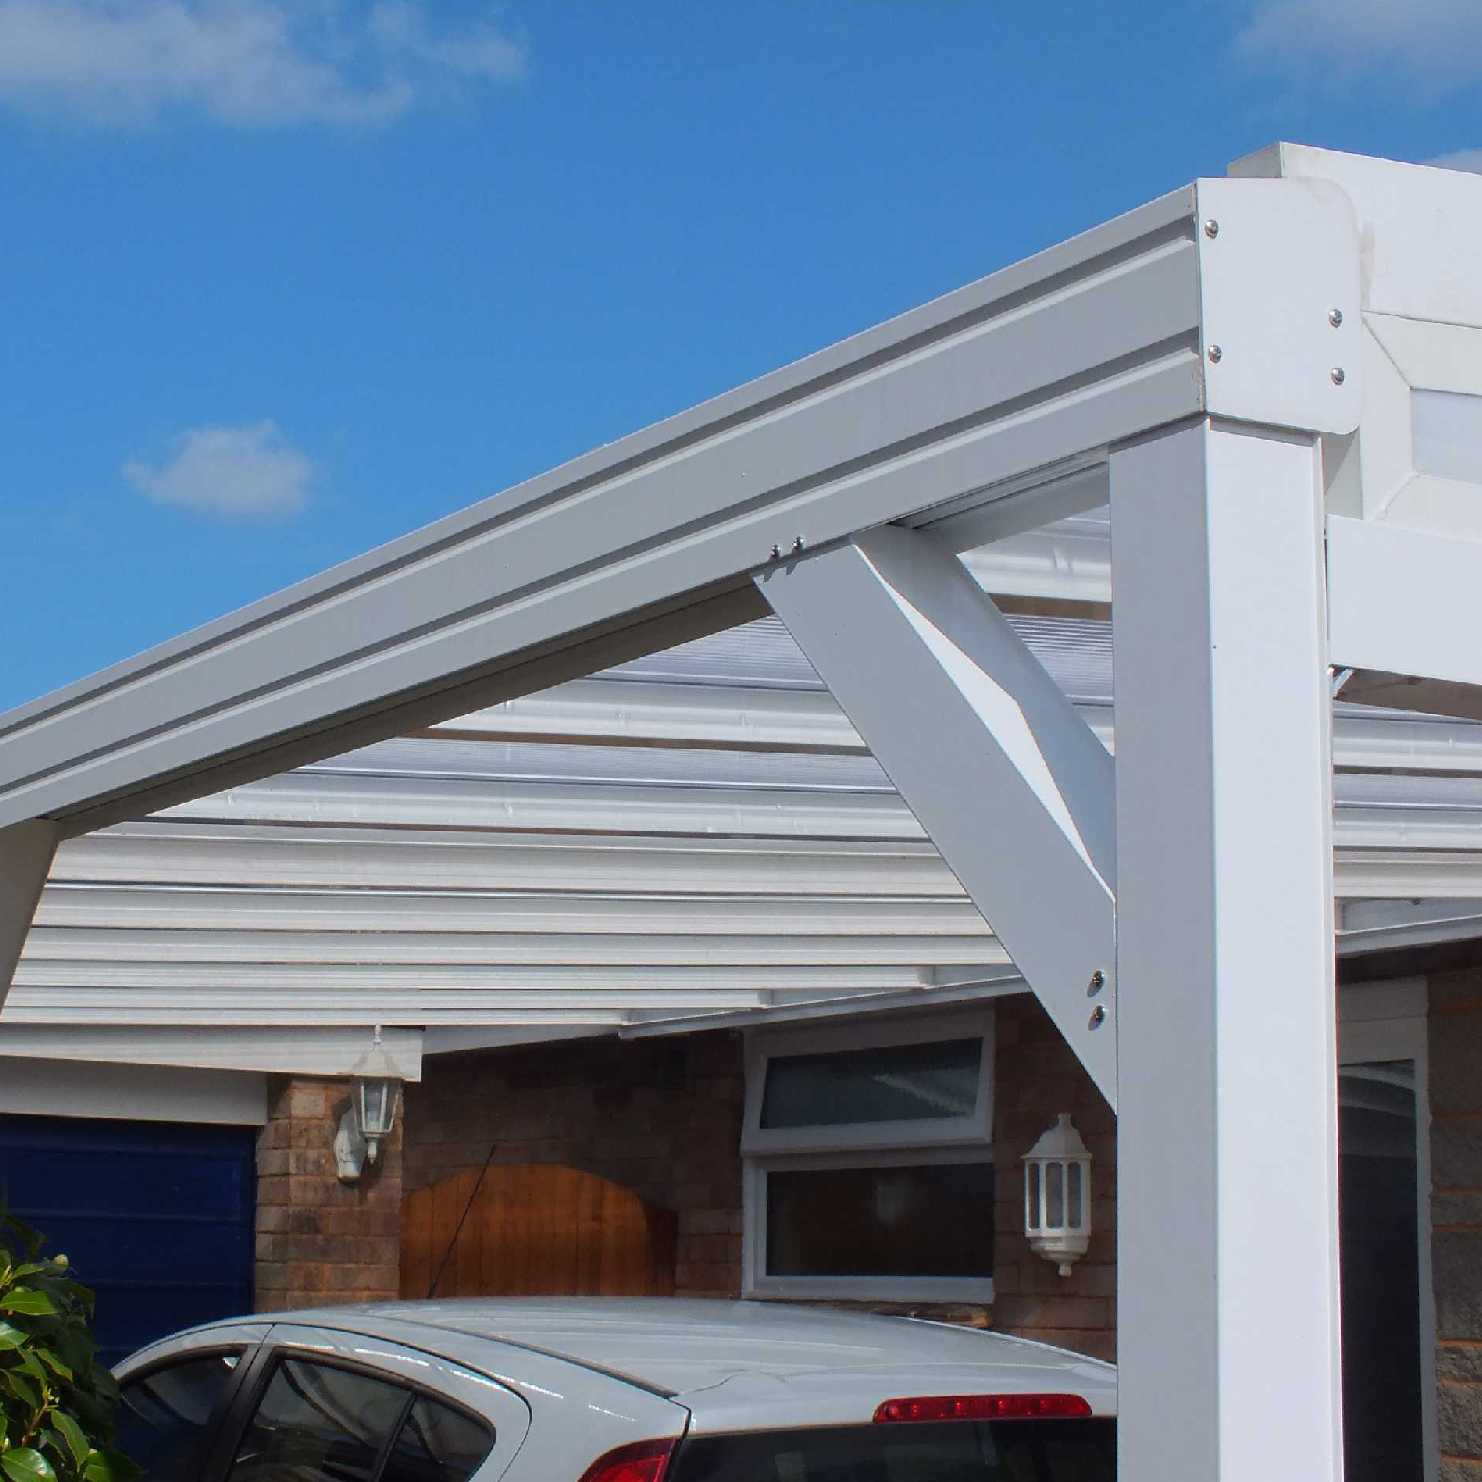 Great deals on Omega Smart Lean-To Canopy, White with 16mm Polycarbonate Glazing - 8.4m (W) x 4.5m (P), (4) Supporting Posts